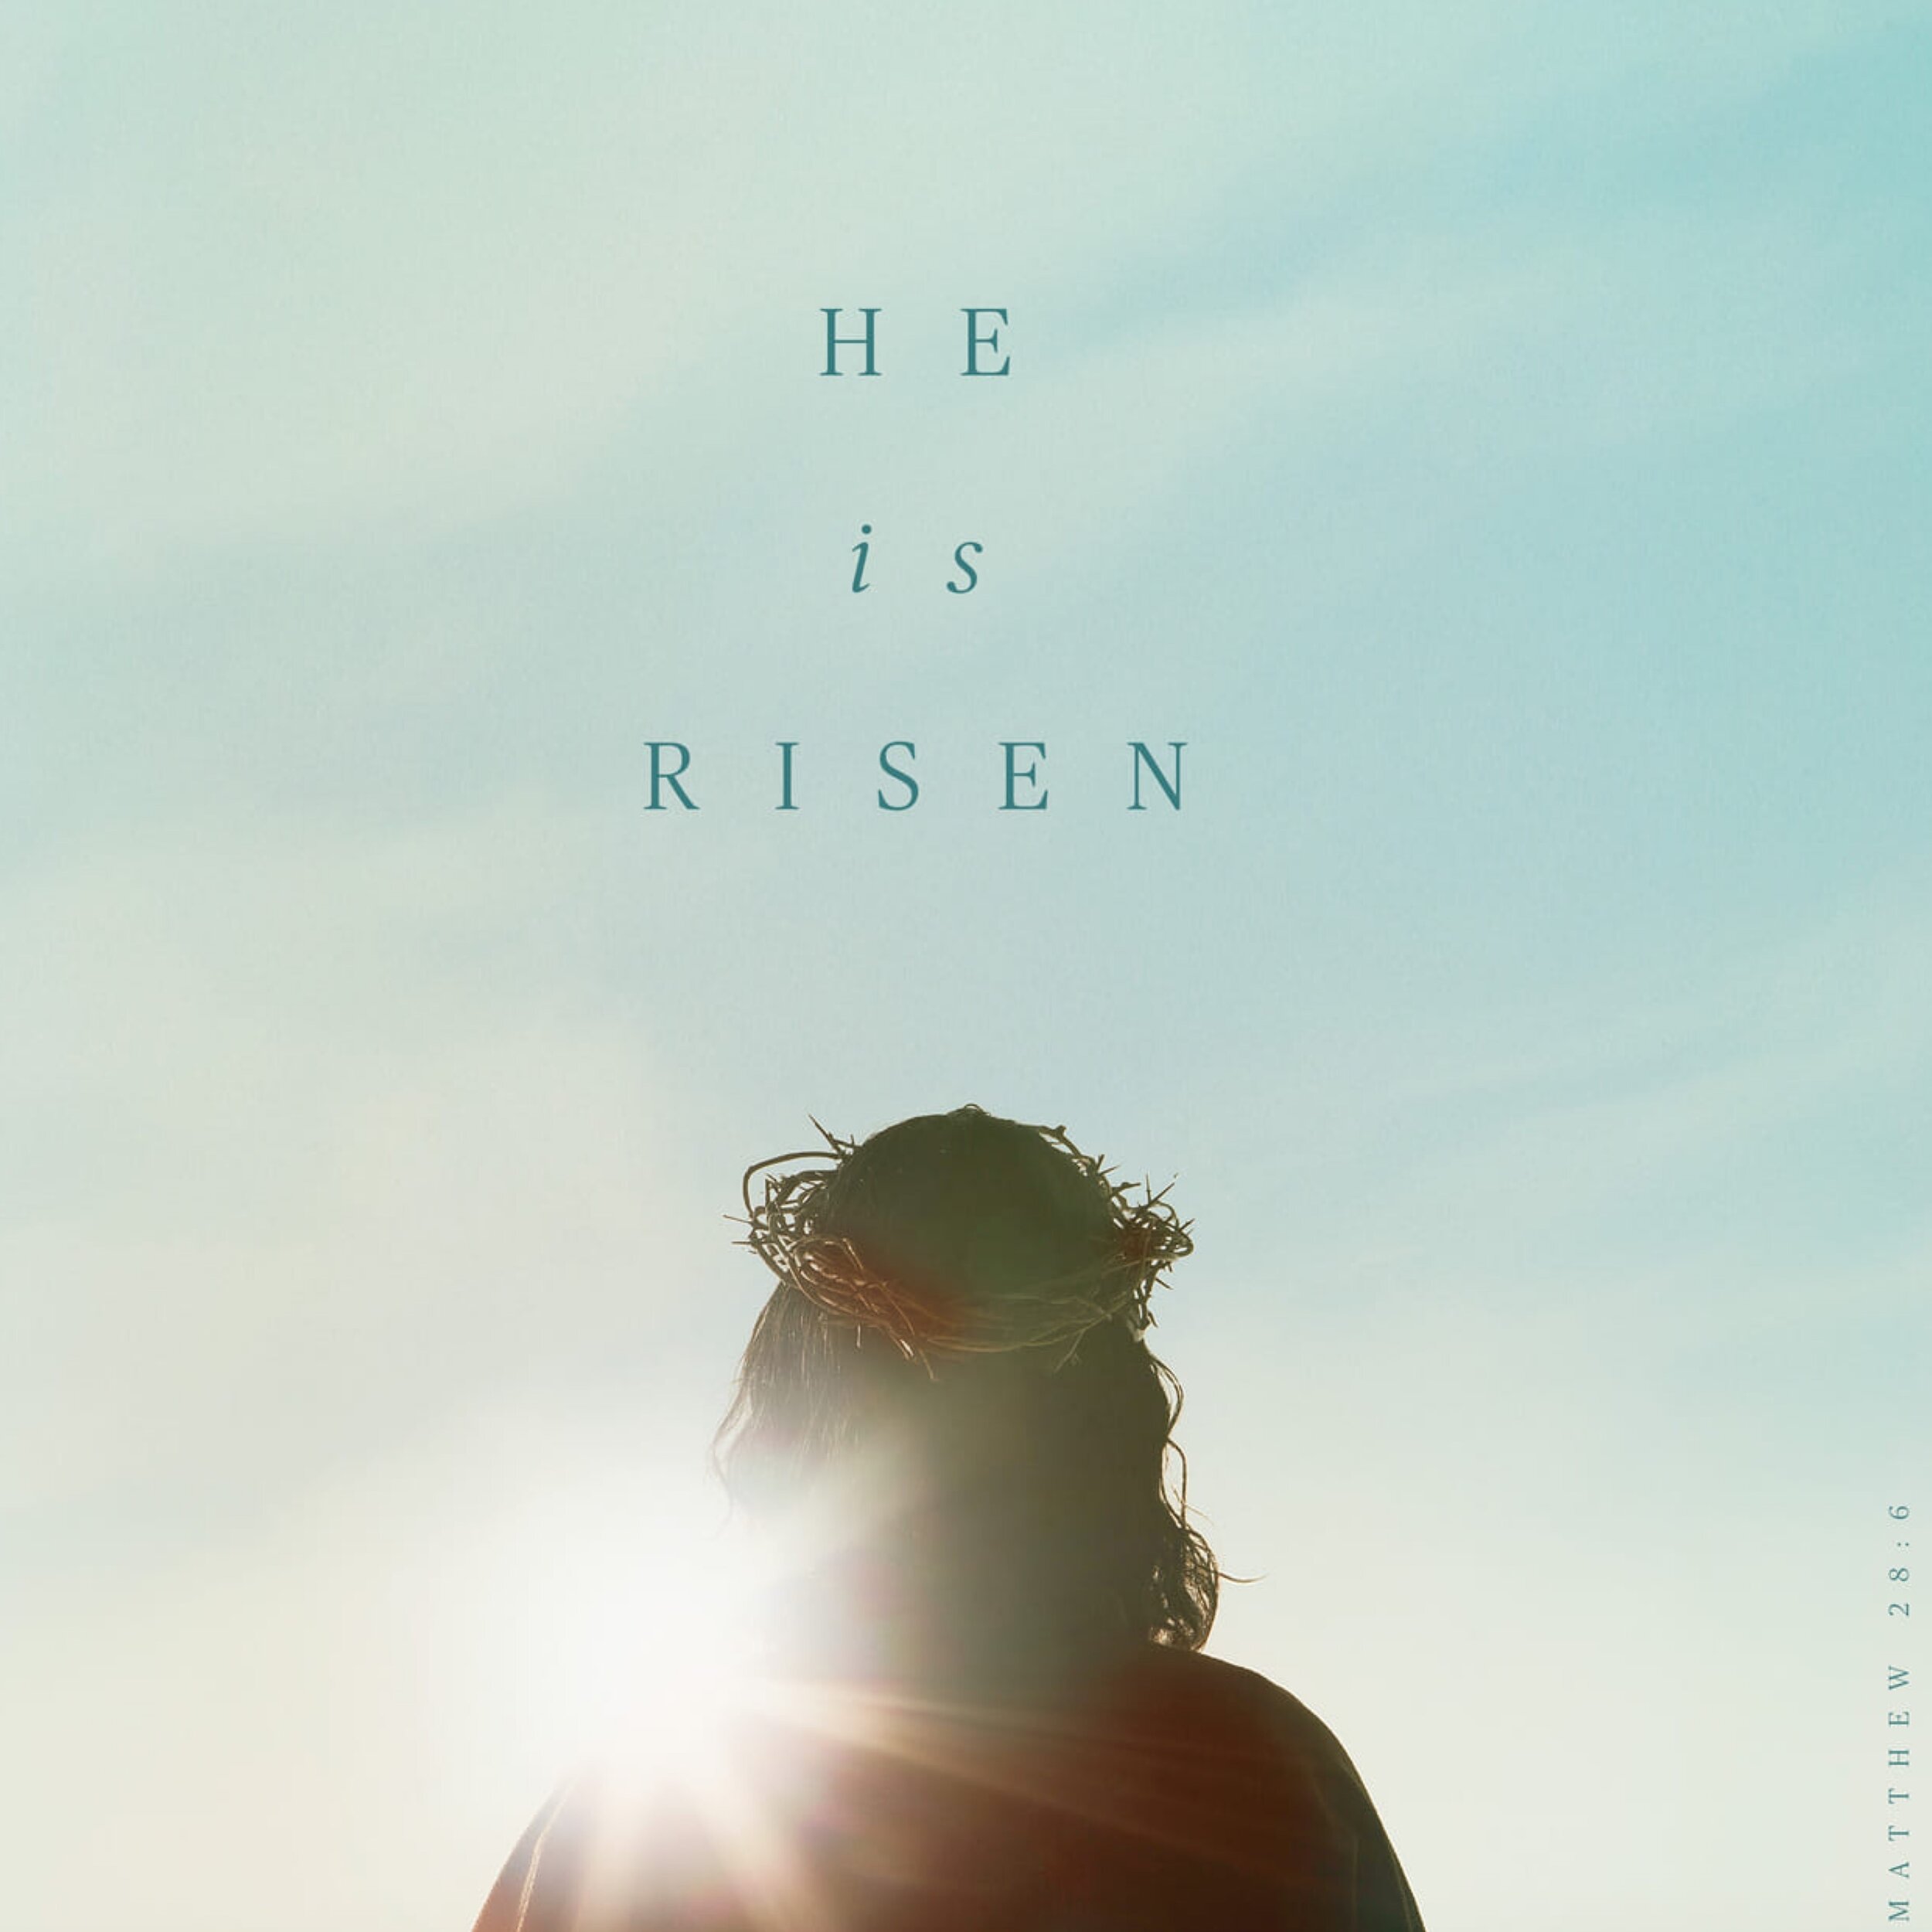 He is risen ✝️💛

The angel said to the women, &ldquo;Do not be afraid, for I know that you are looking for Jesus, who was crucified. He is not here; he has risen, just as he said. 🌤

Come and see the place where he lay. Then go quickly and tell hi